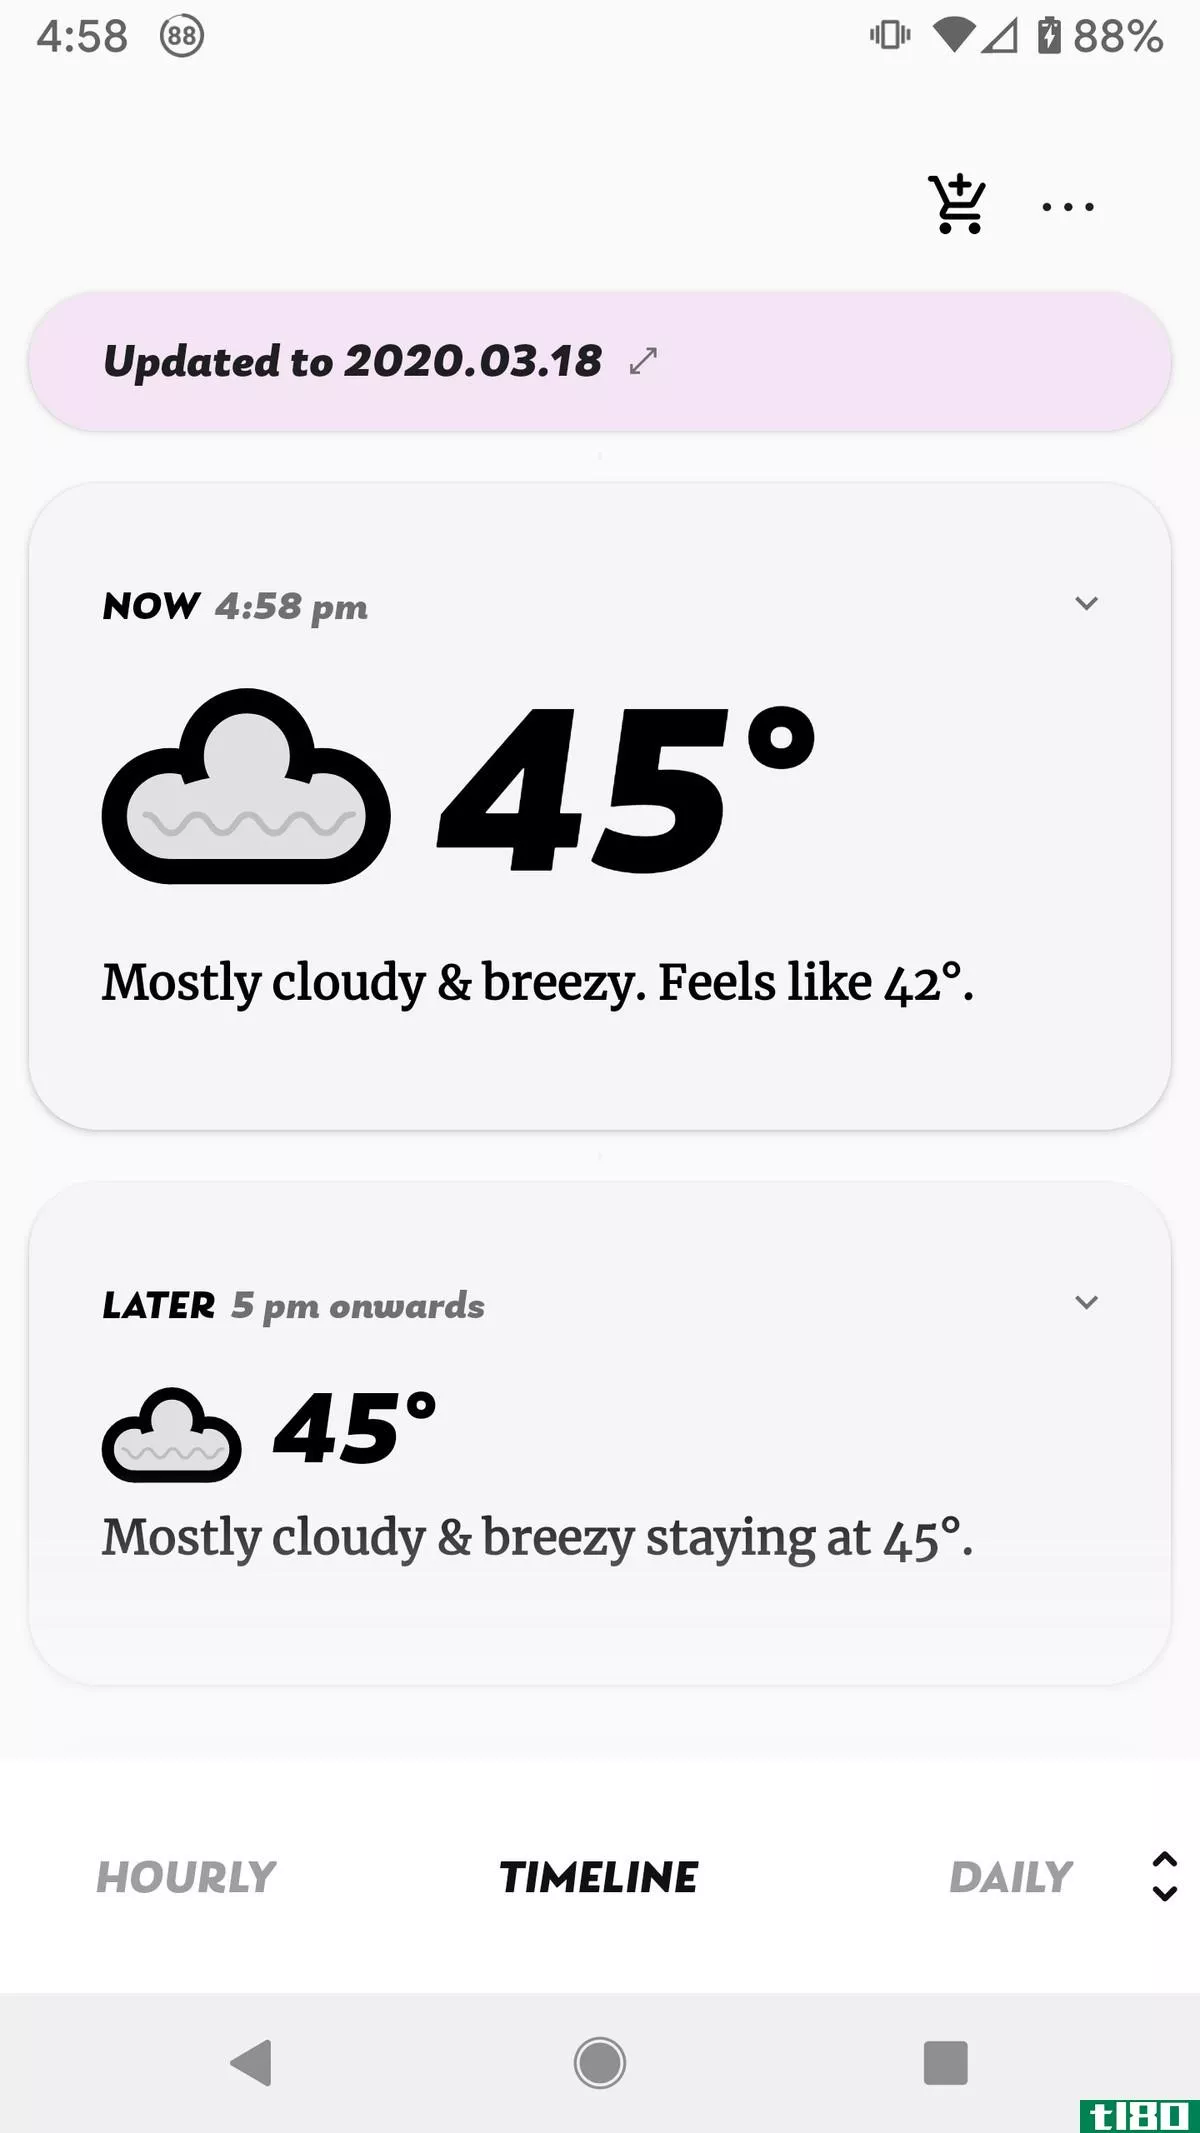 Appy Weather’s timeline lets you scroll down to see the current weather and the upcoming forecast.